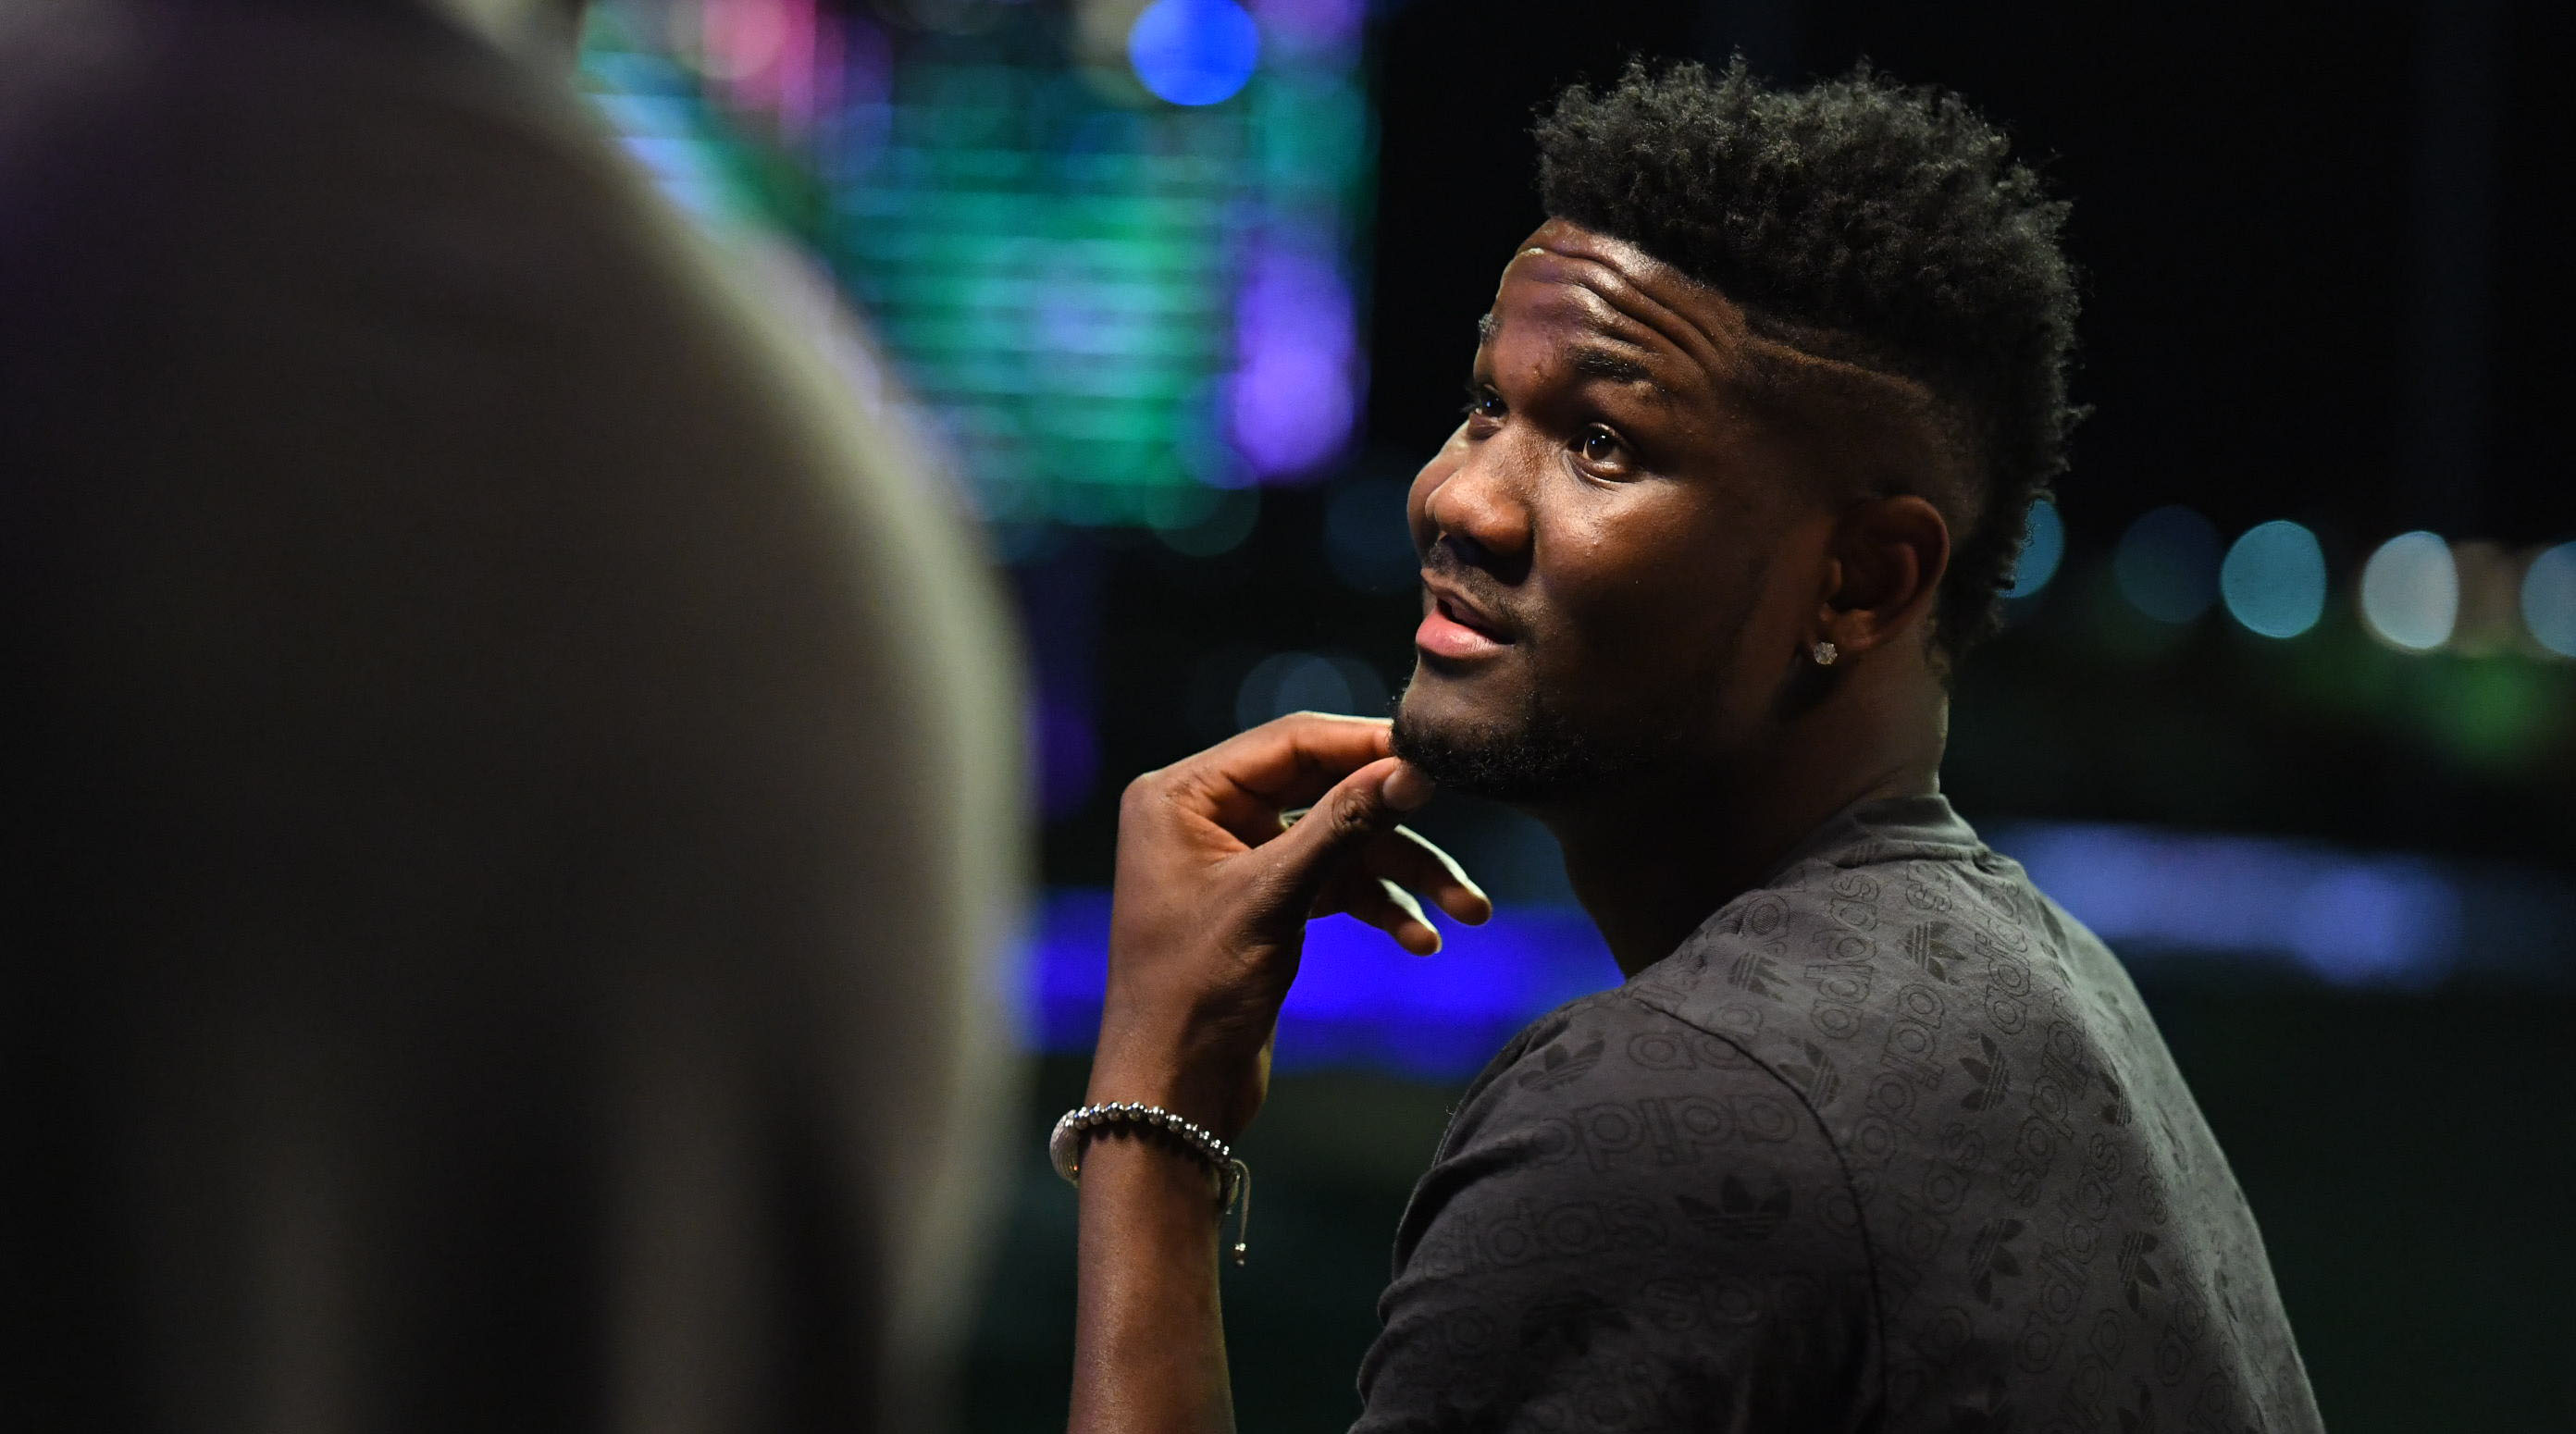 Deandre Ayton: The 2018 NBA Draft's No. 1 Player and ...